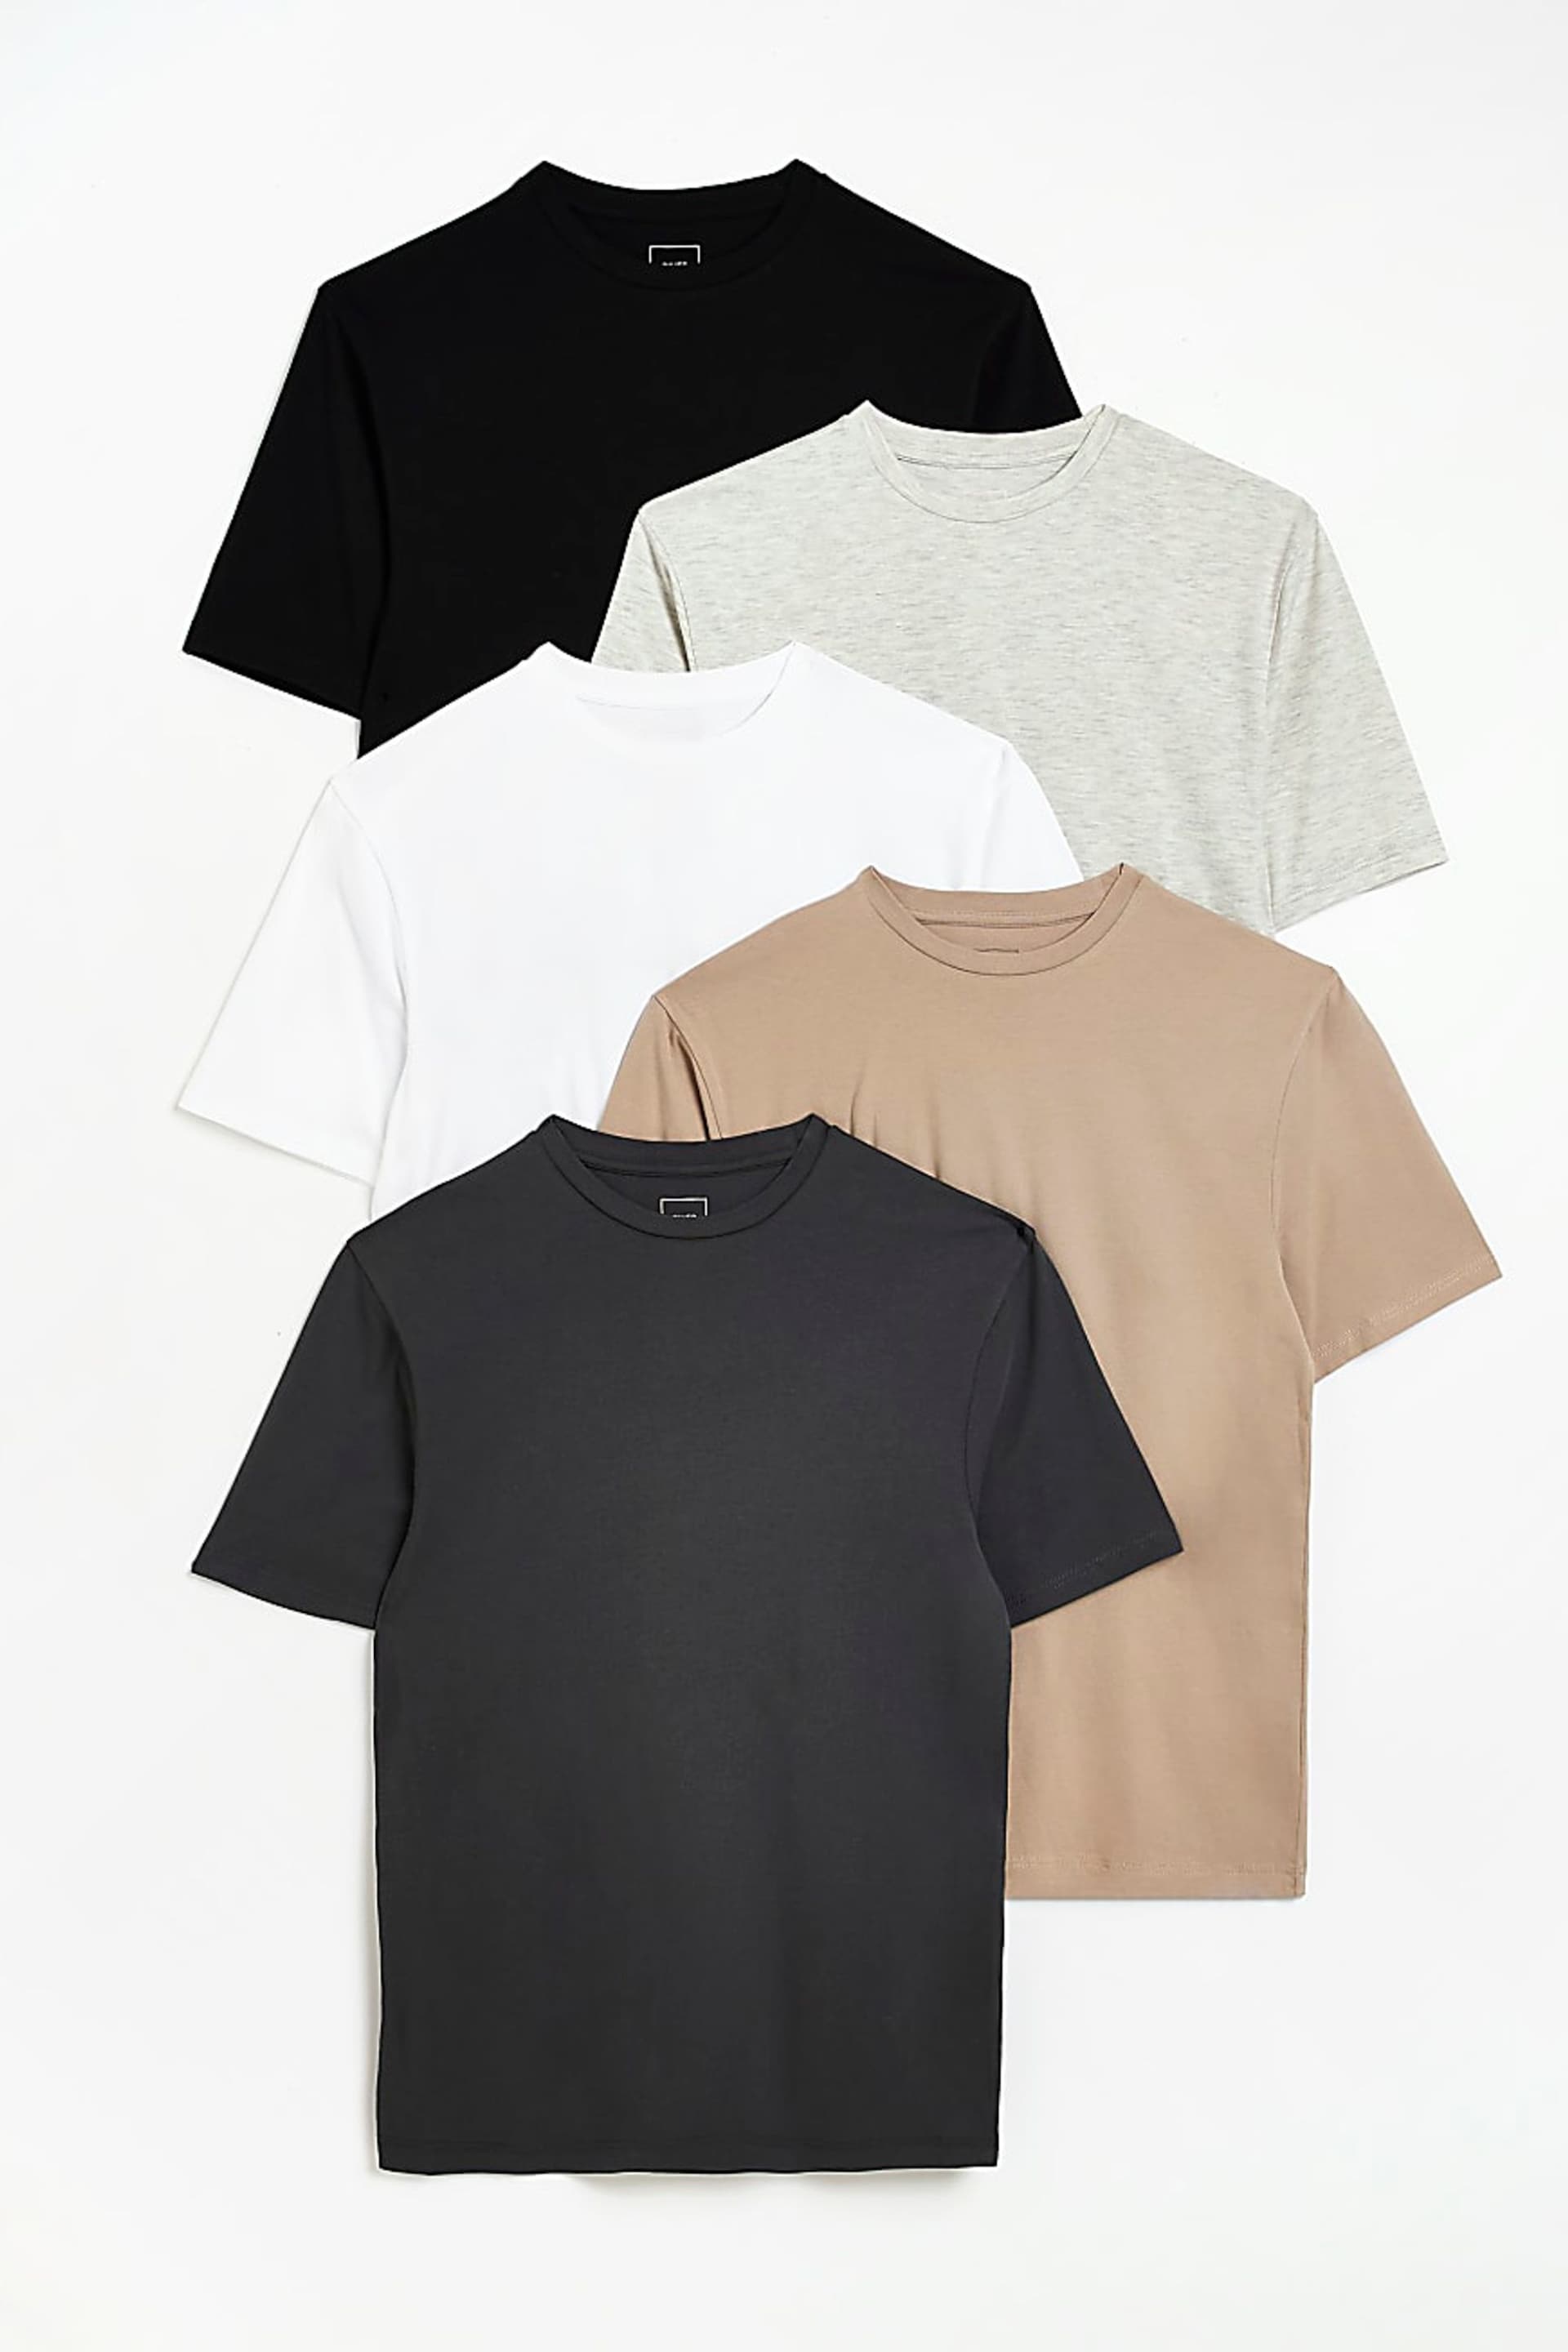 River Island Black/Grey/Beige/White Muscle T-Shirts 5 Pack - Image 1 of 5